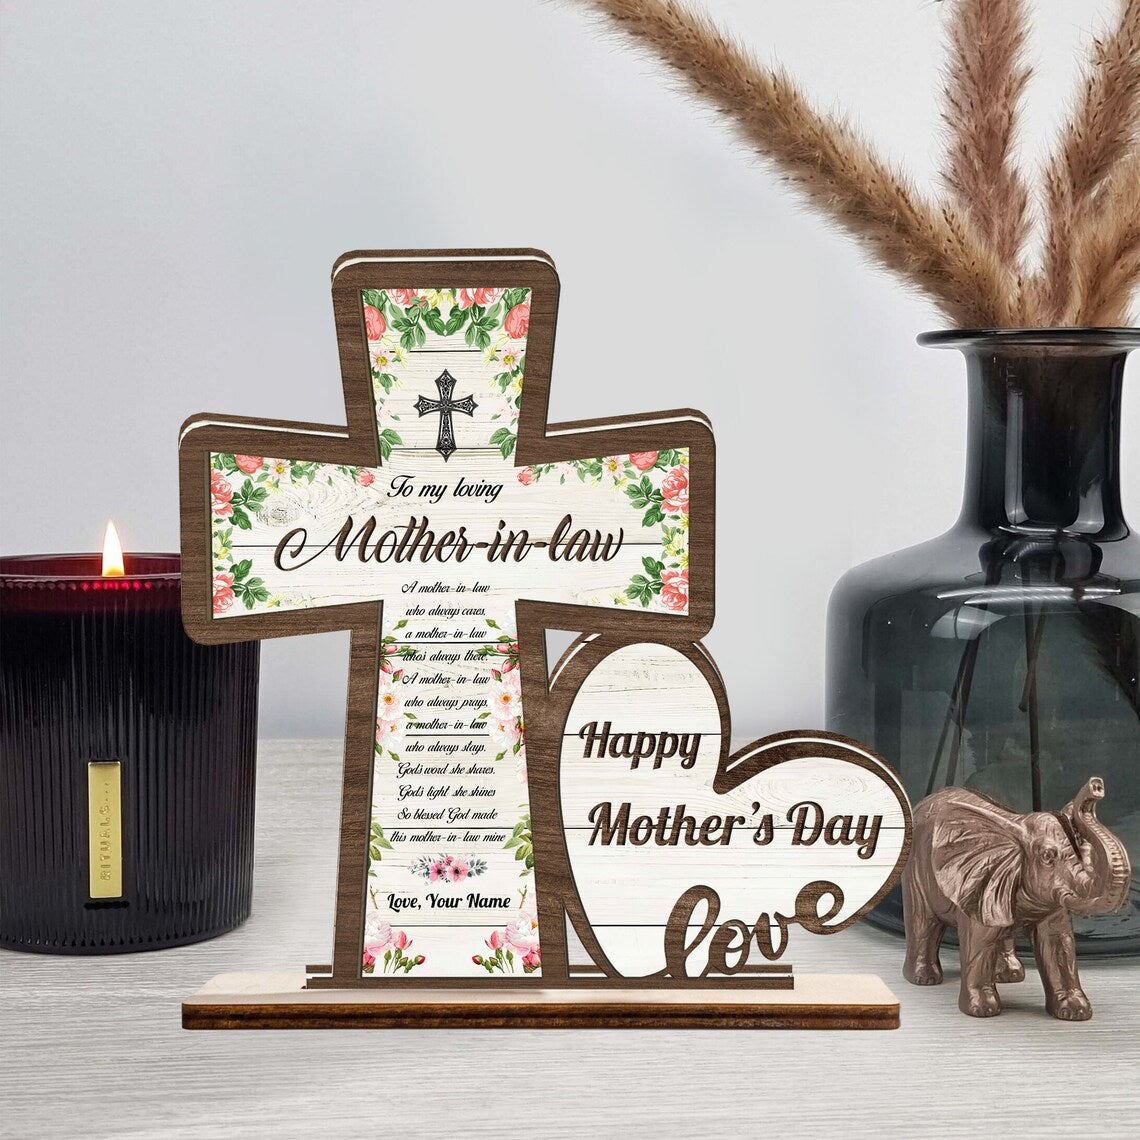 Personalized Christian Religon Mom Gift - Mother's Day Gift